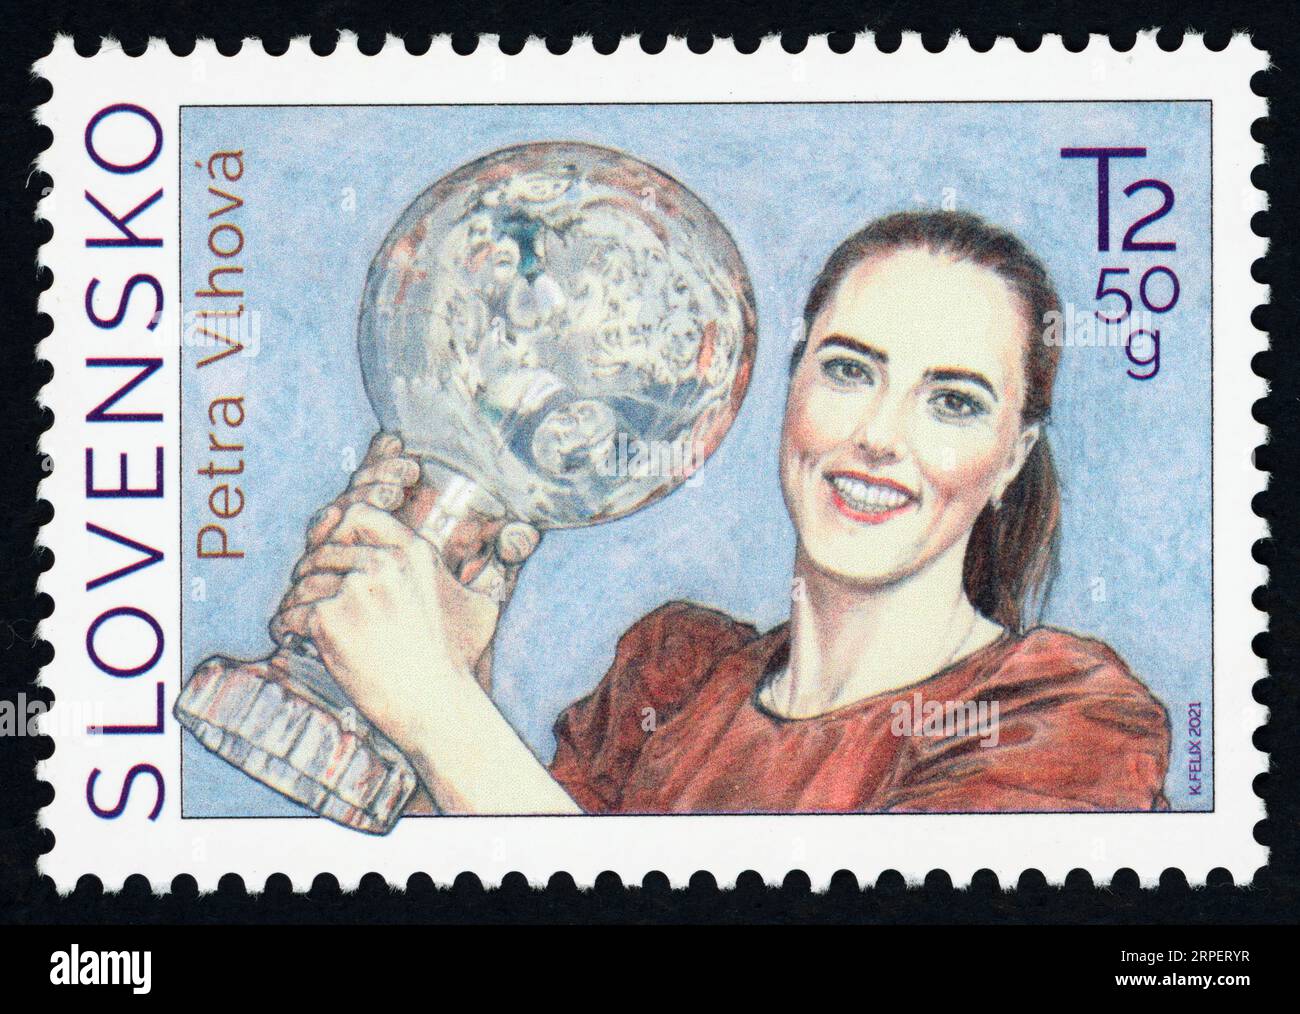 Petra Vlhová. Postage stamp issued in Slovakia in 2021. Petra Vlhová (born 1995) is a Slovak World Cup alpine ski racer who specialises in the technical events of slalom and giant slalom. Vlhová won the World Cup overall title in 2021 and the gold medal in the 2022 Winter Olympics in the slalom event, becoming the first Slovak skier to achieve these feats. Stock Photo